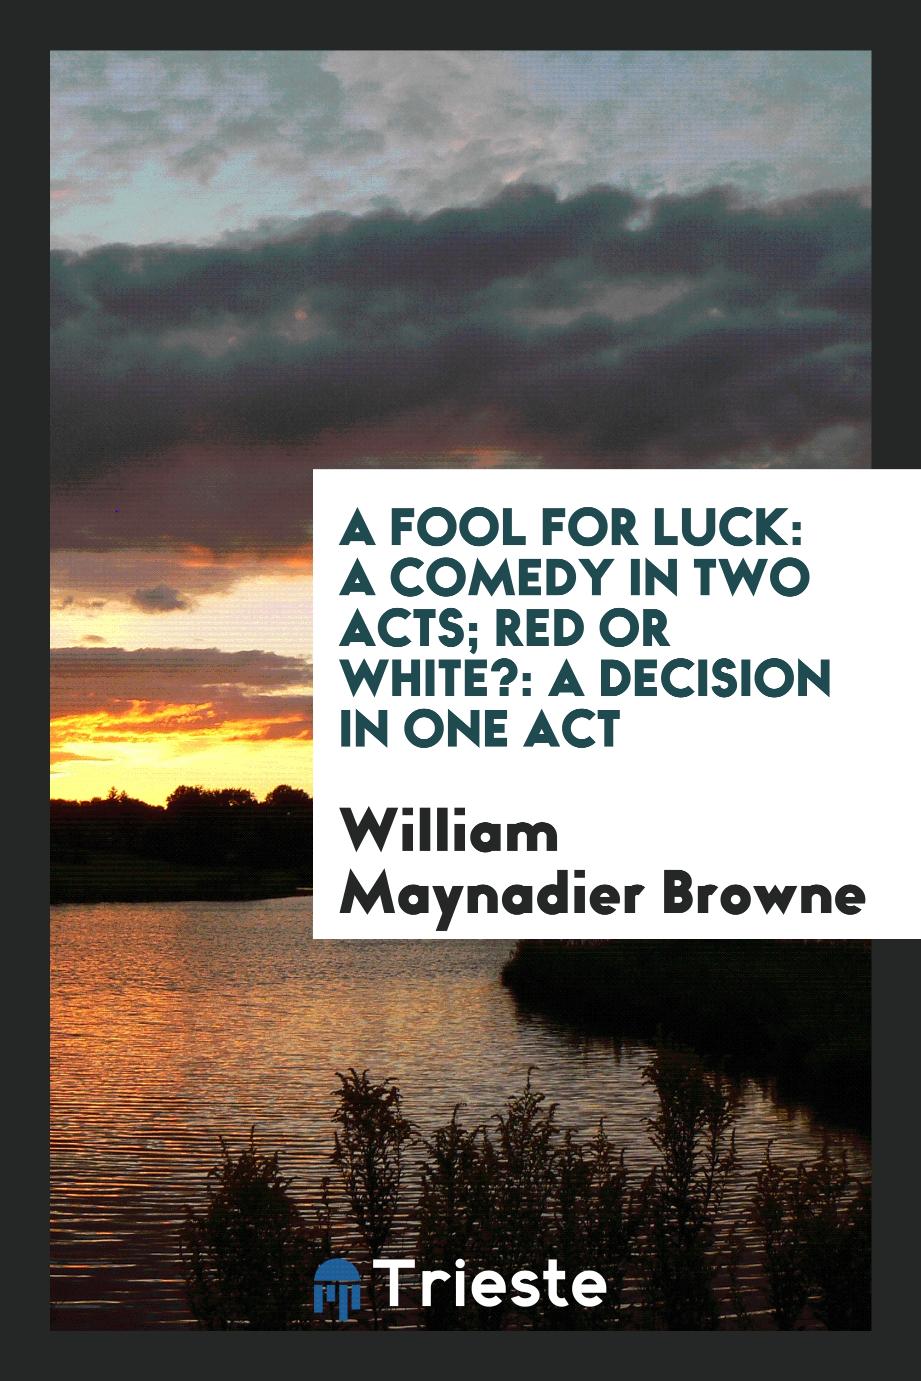 A Fool for Luck: A Comedy in Two Acts; Red or White?: A decision in one act